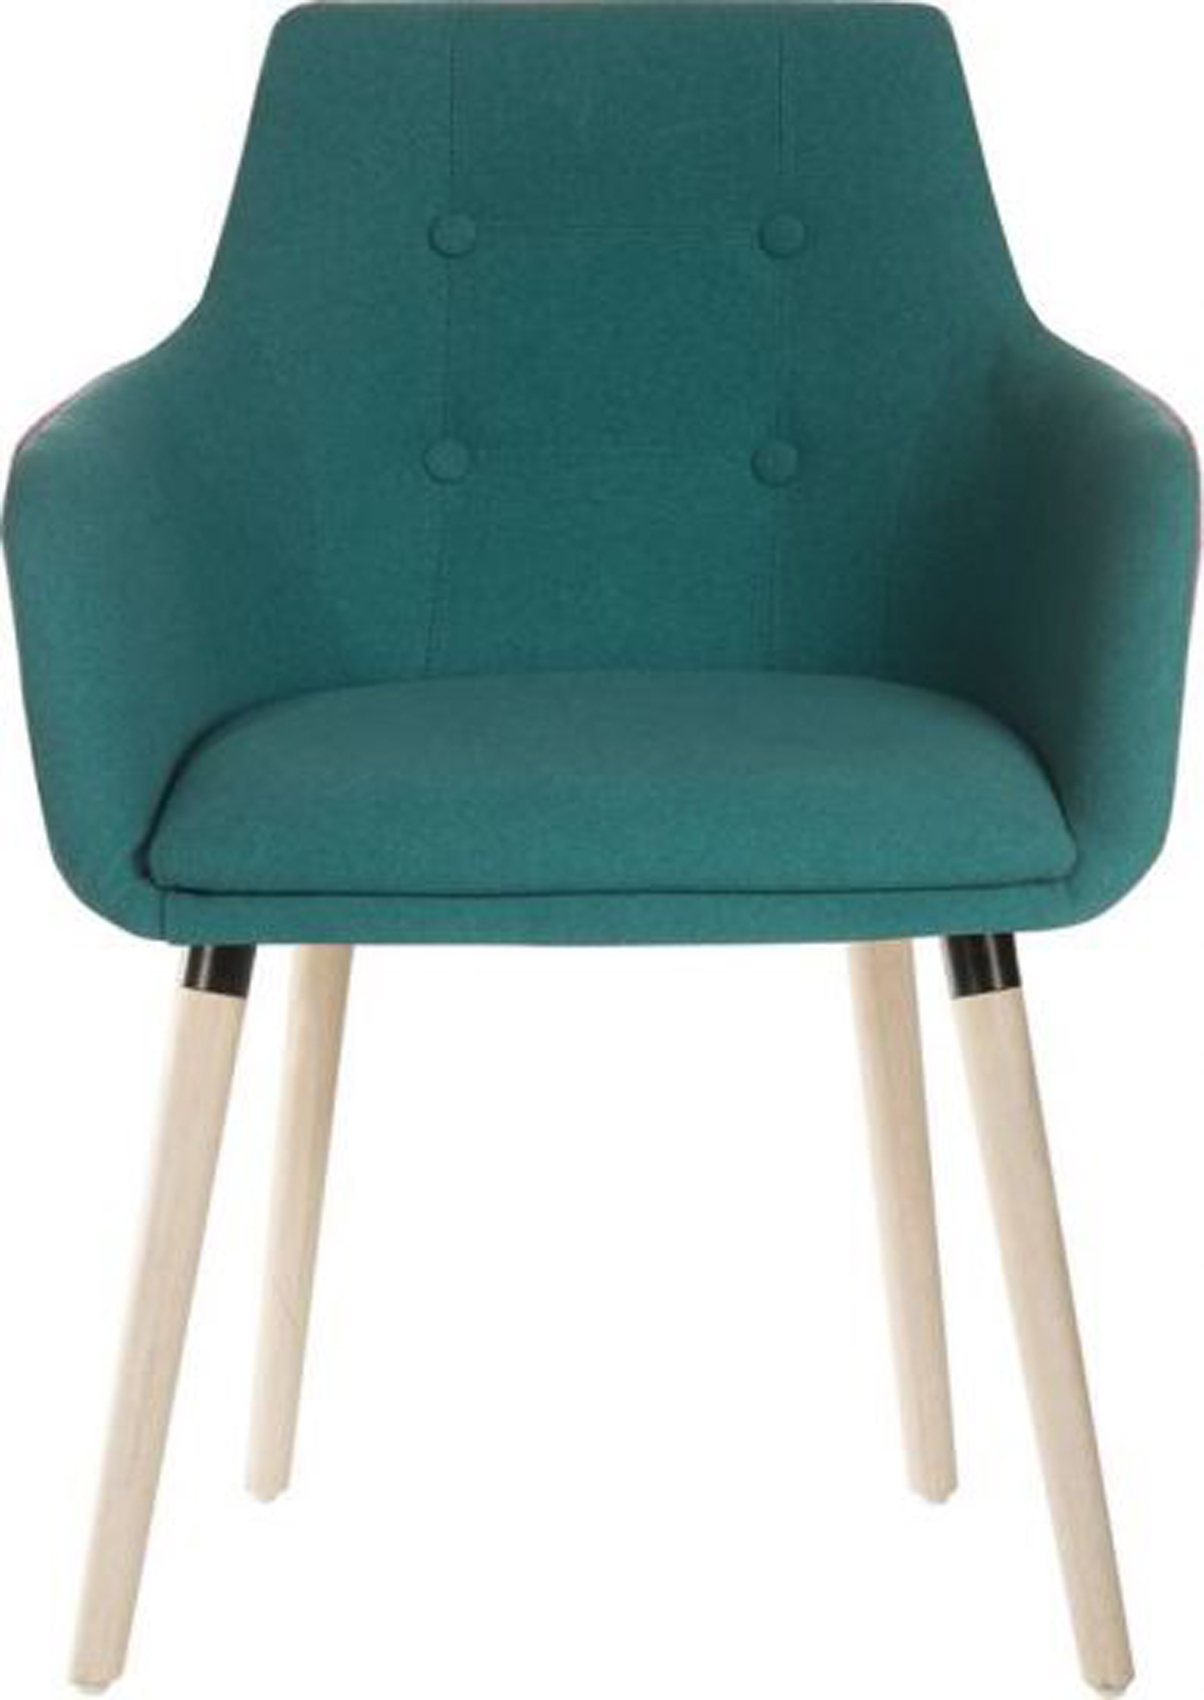 Upholstered Reception Chair - Green